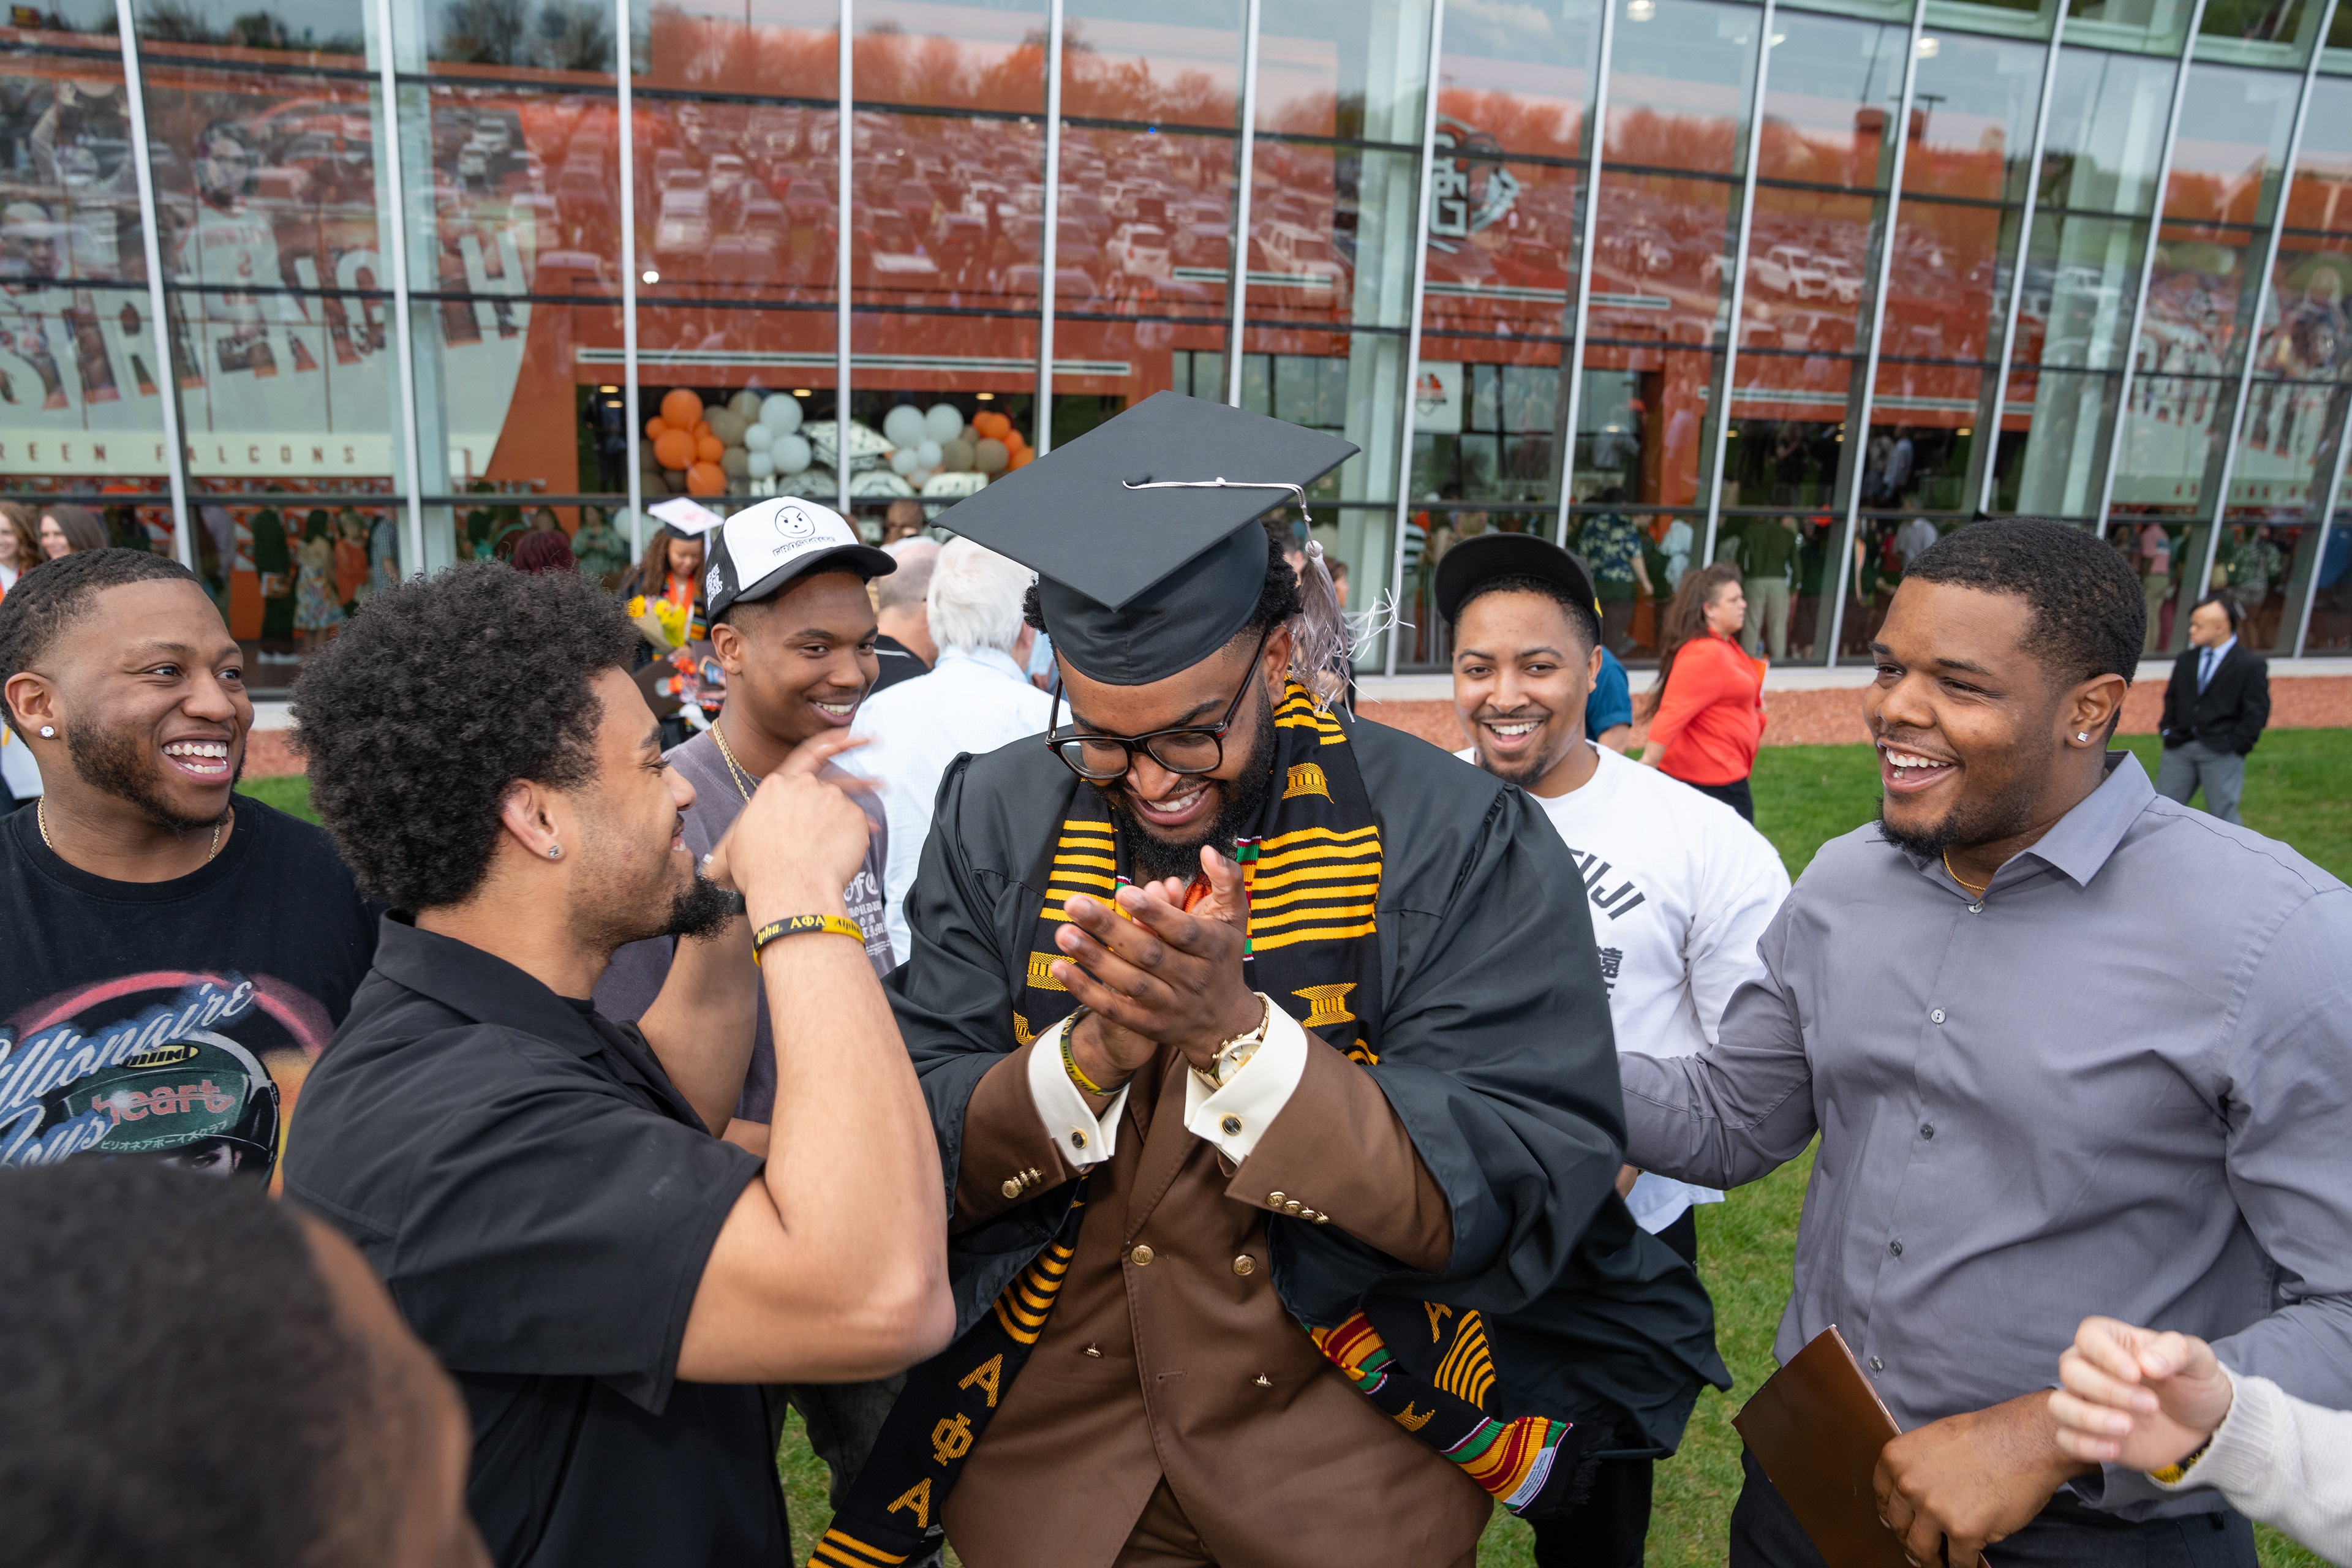 A graduate with a cap and gown smiles while friends congratulate him